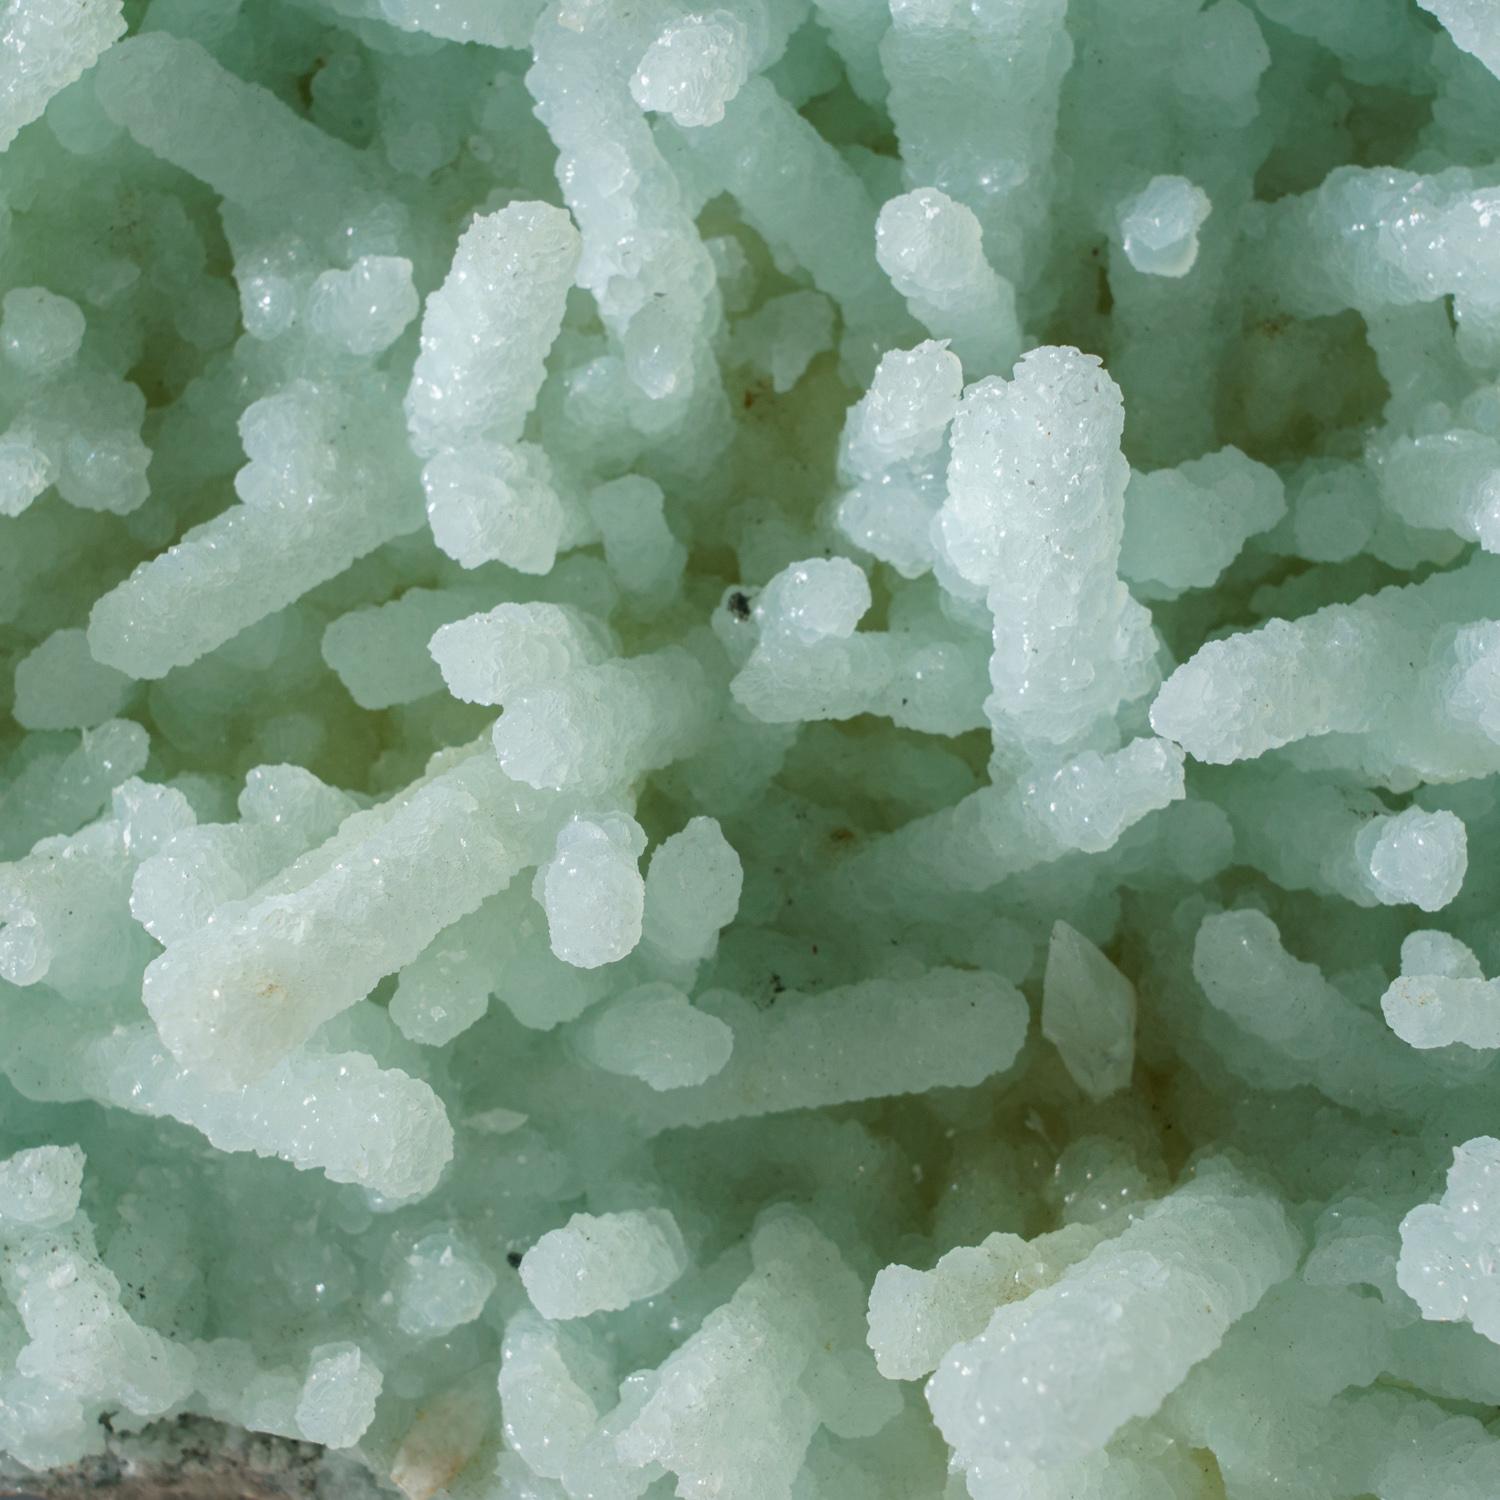 From Tekhdi, Madhya Pradesh, India

This is a classic branchlike large specimen of gorgeous, translucent, mint-green prehnite crystals (pseudomorphs after elongated laumontite crystals) from this famous locale.

Weight: 3 lbs, Dimensions: 10 x 3 x 8